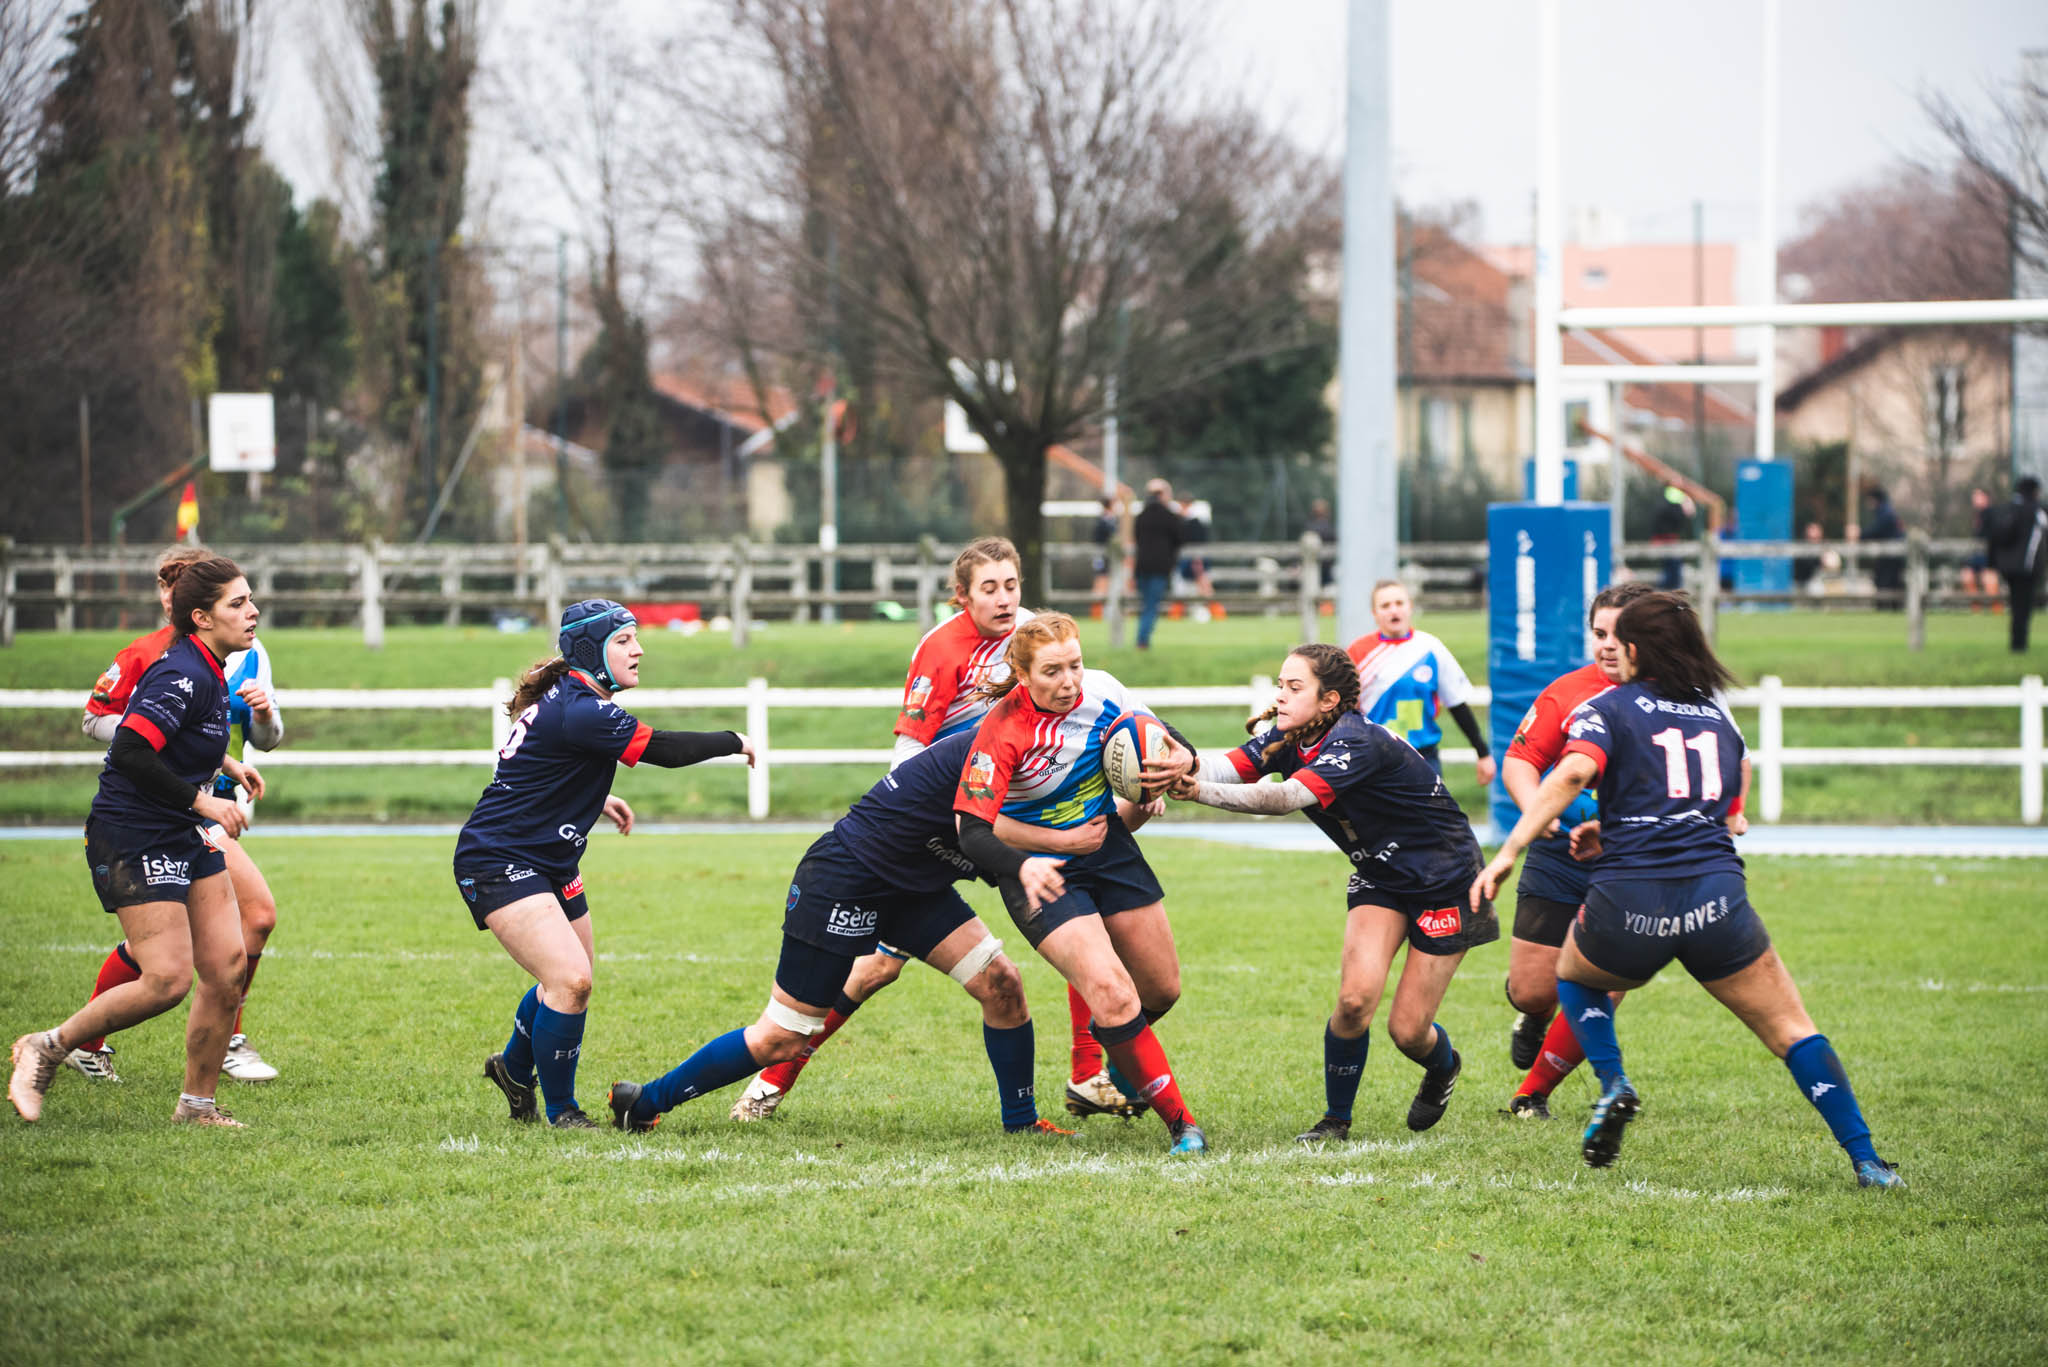 1812_Rugby_Bron-28